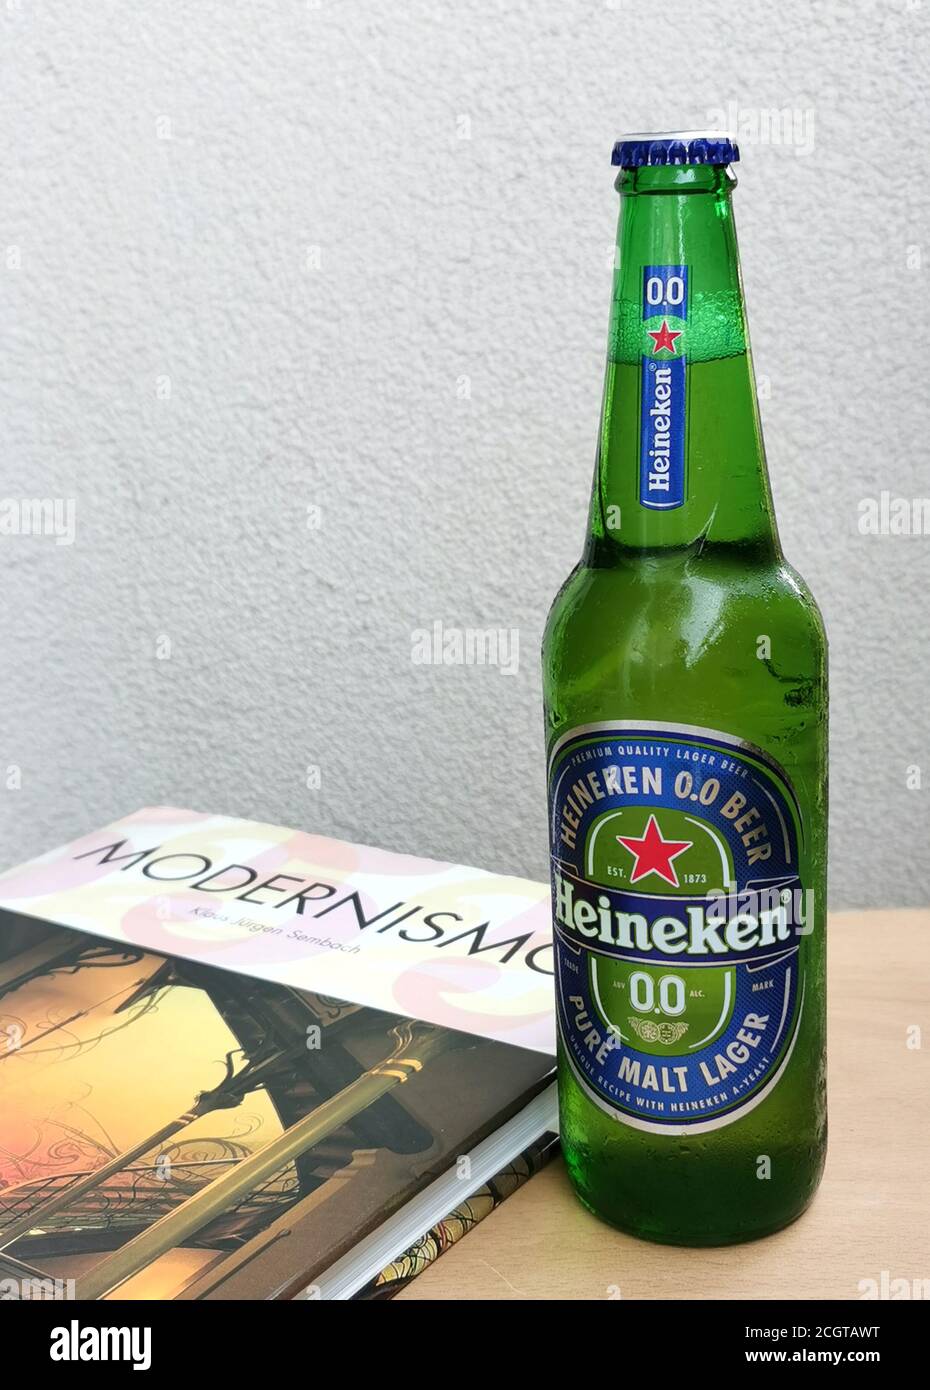 Green glass bottle of Heineken beer and book on wooden table. Stock Photo